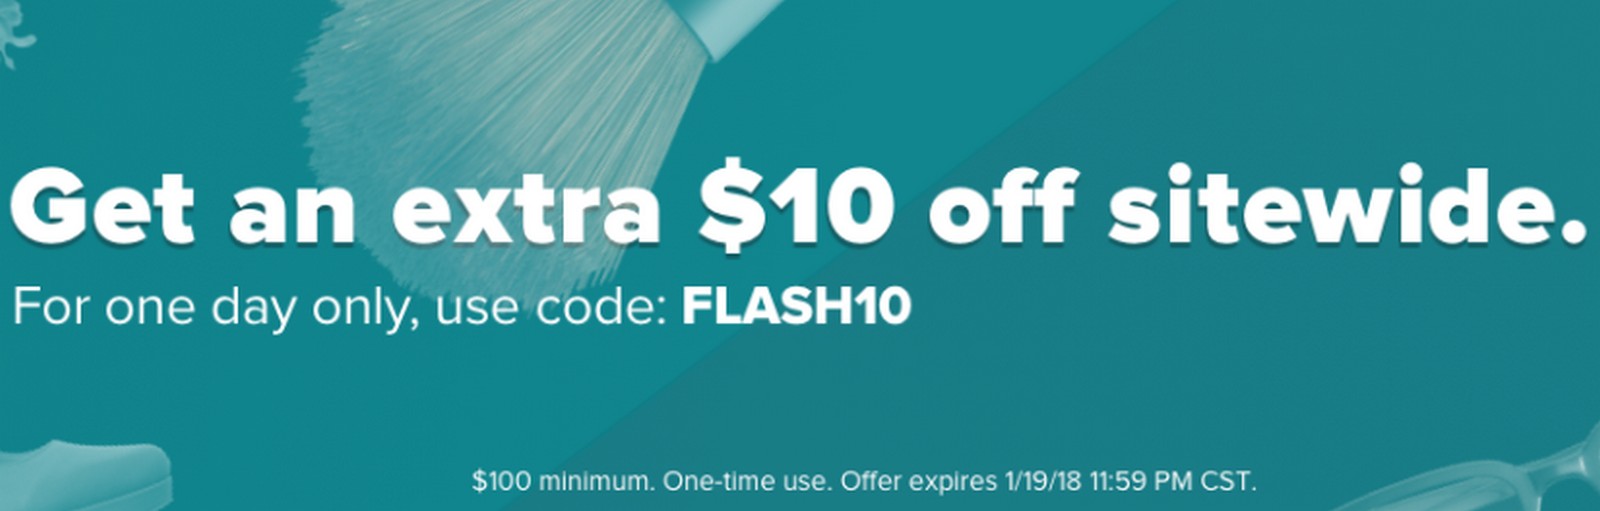 Raise Gift Card Sale: Get $10 Off $100 Site-wide